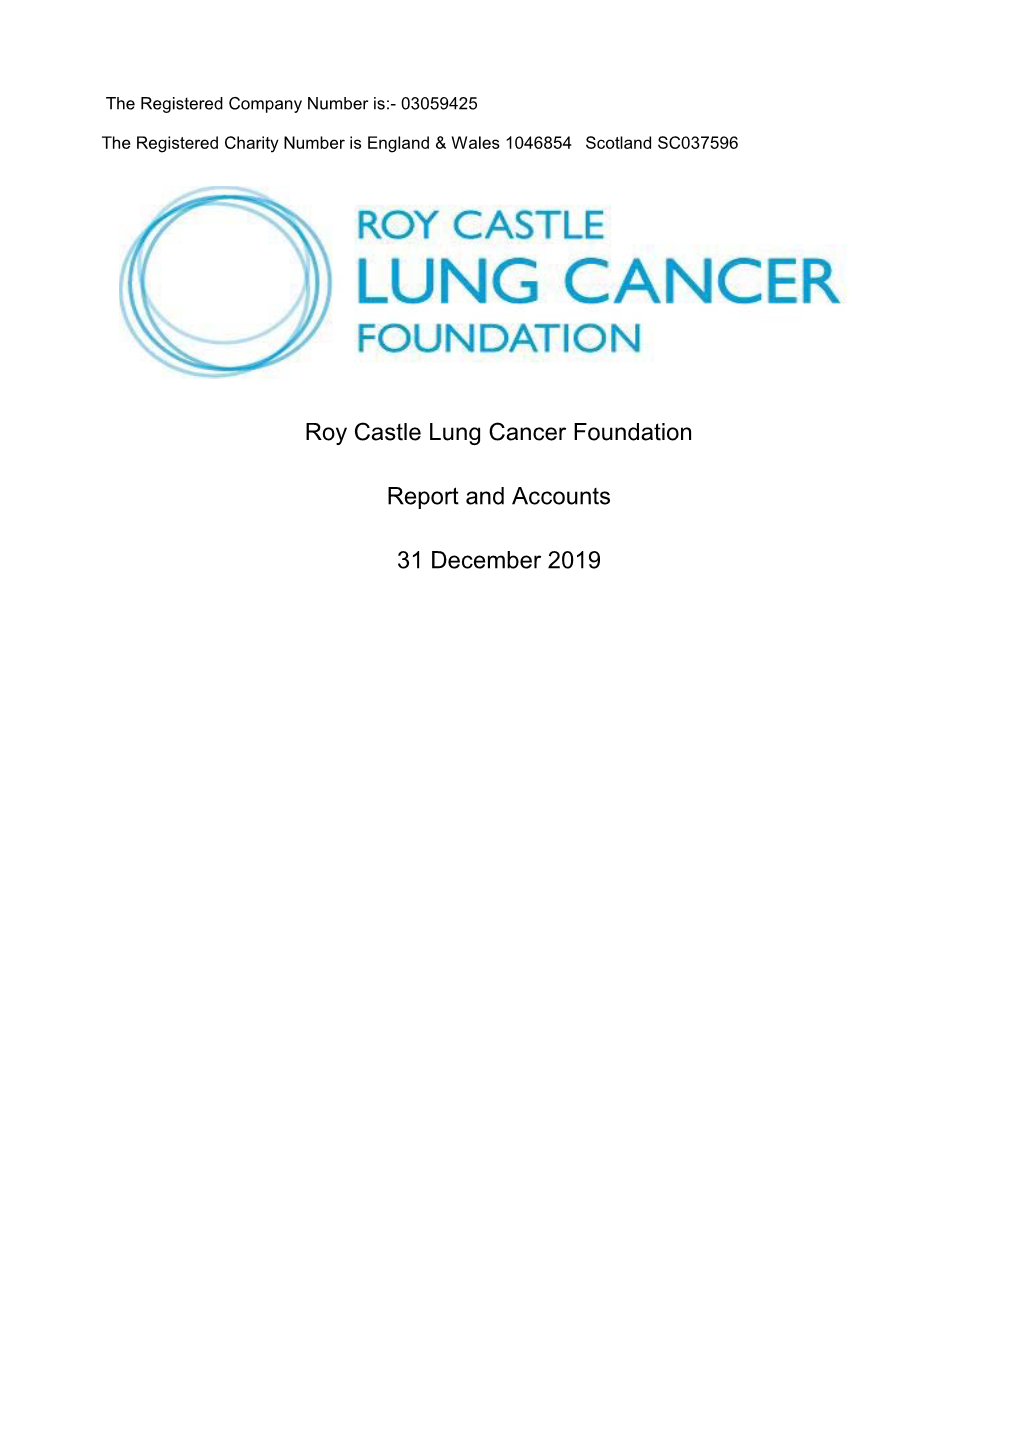 Roy Castle Lung Cancer Foundation Report and Accounts 31 December